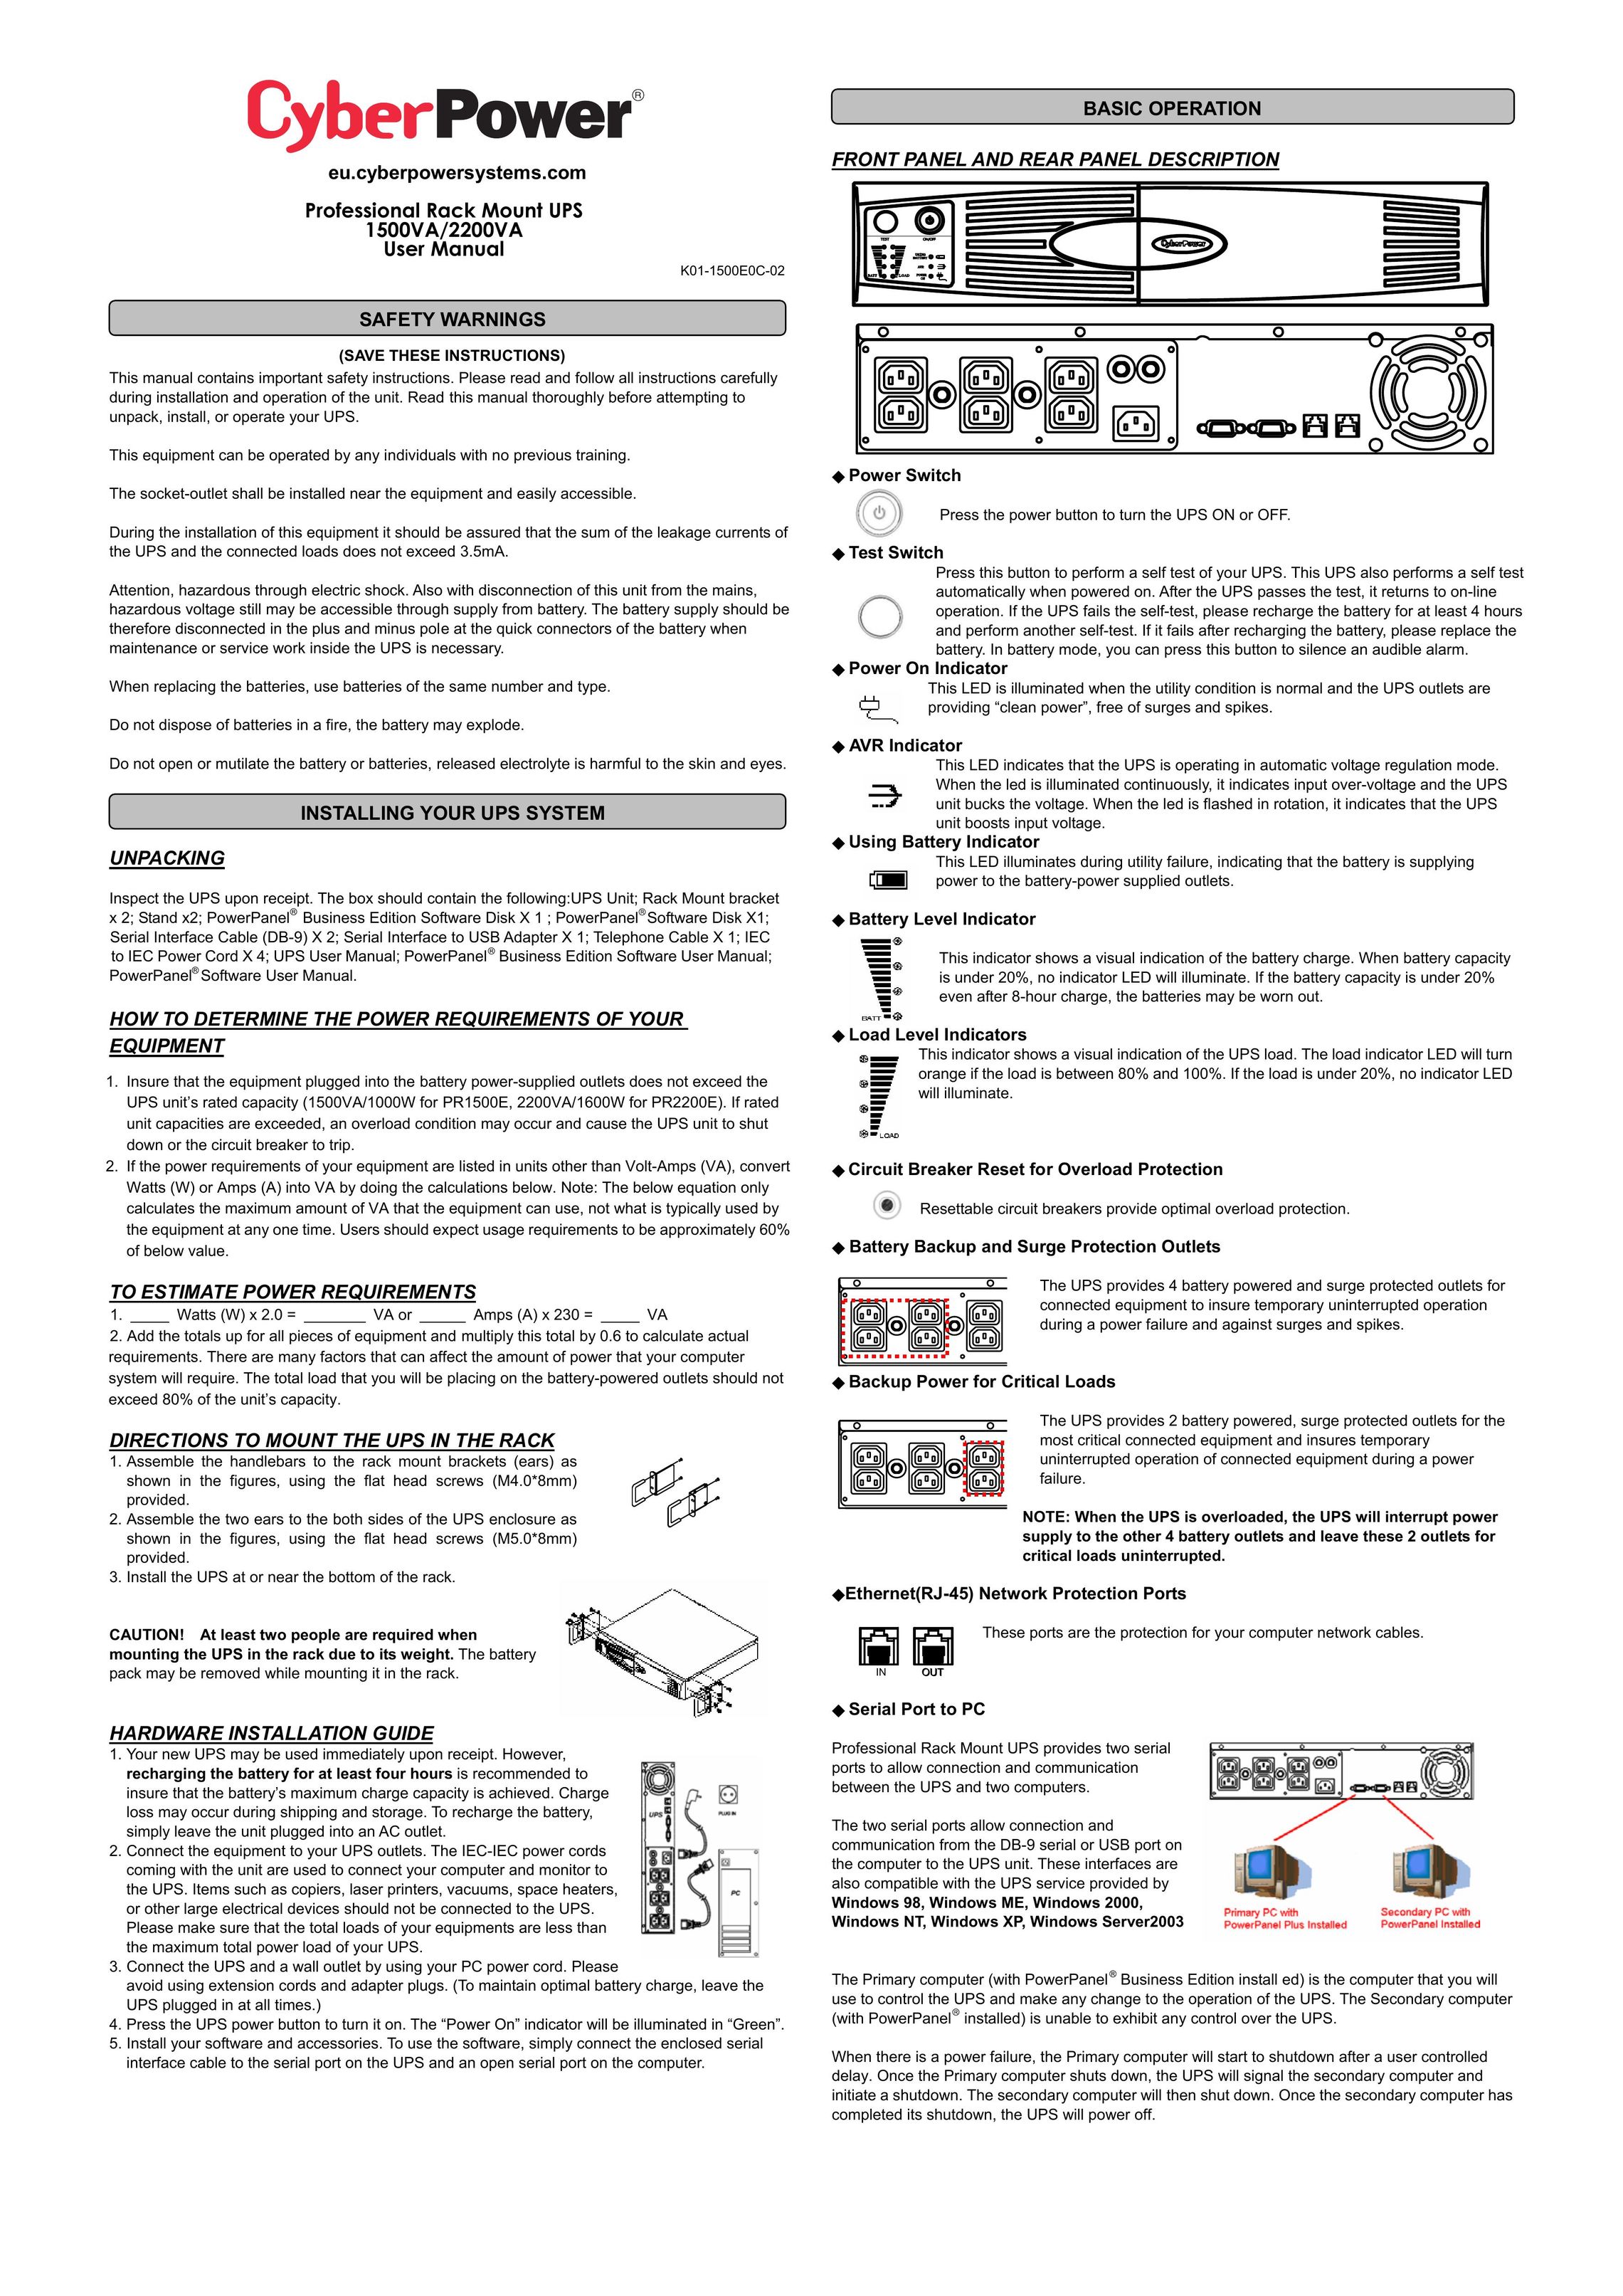 CyberPower Systems 2200VA Power Supply User Manual